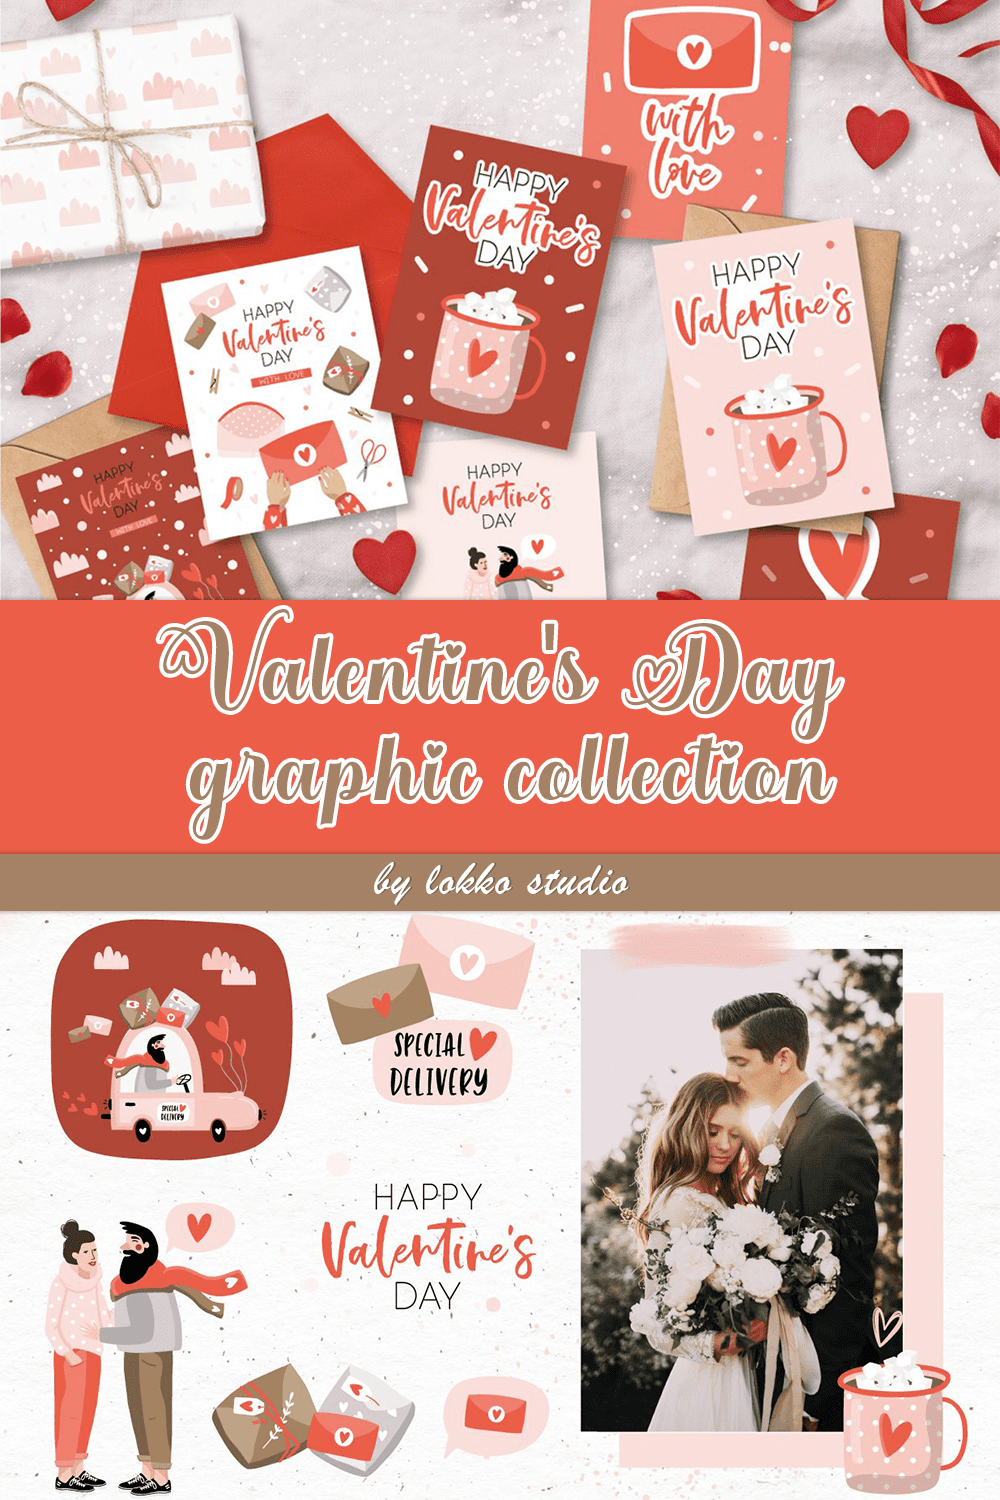 Special graphics for Valentine's Day on prints.